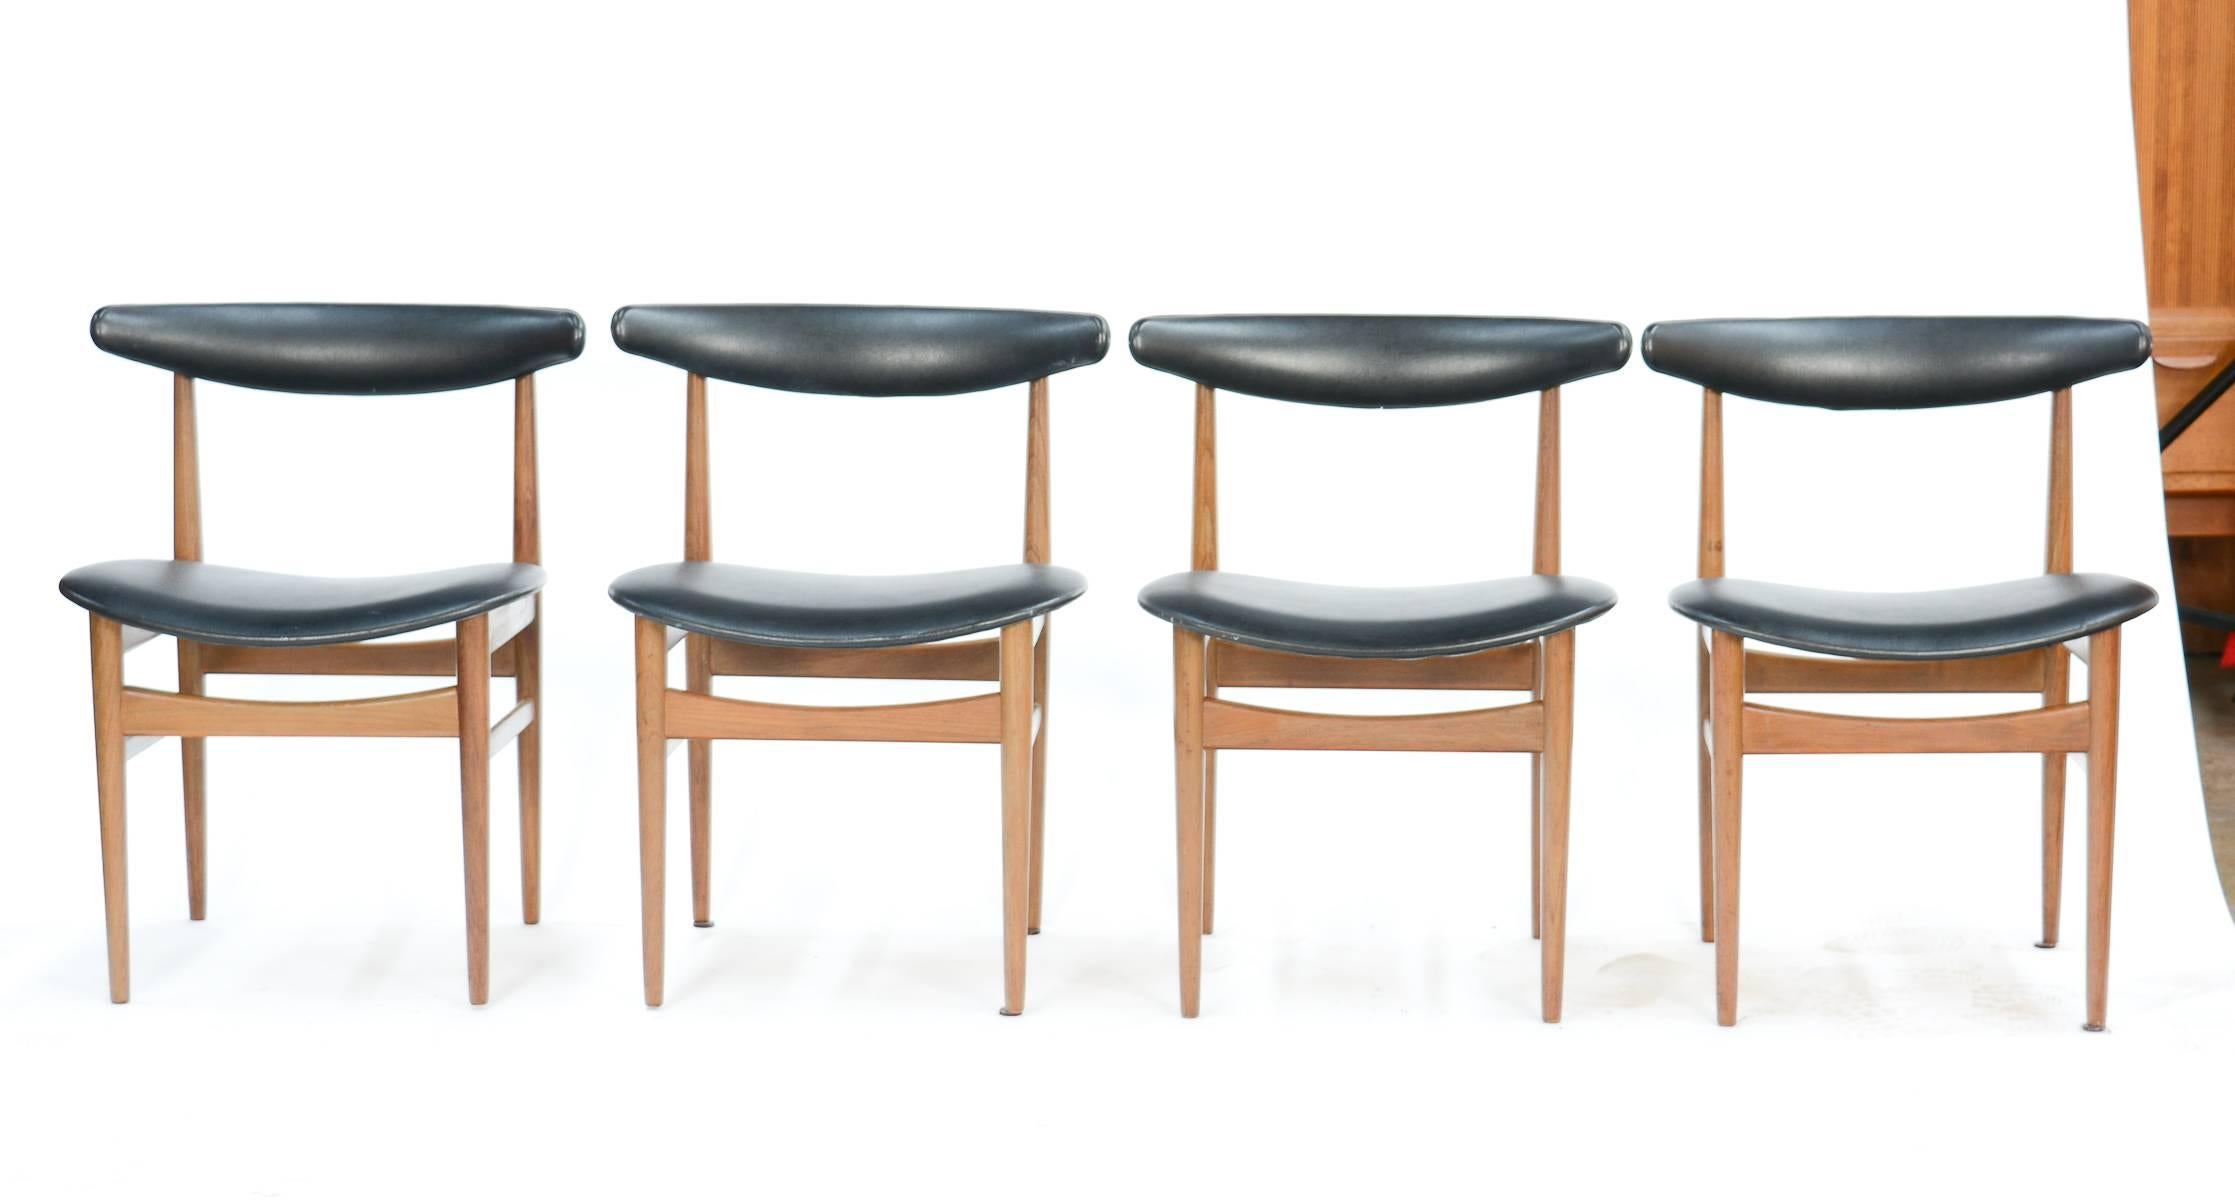 Inspired by modern Danish master Hans Wegner, this set of eight compass-back chairs in teak with black vinyl back rests and seats delivers simple, yet marvellous sophistication. Exquisite style from the height of the Mid-Century Danish design